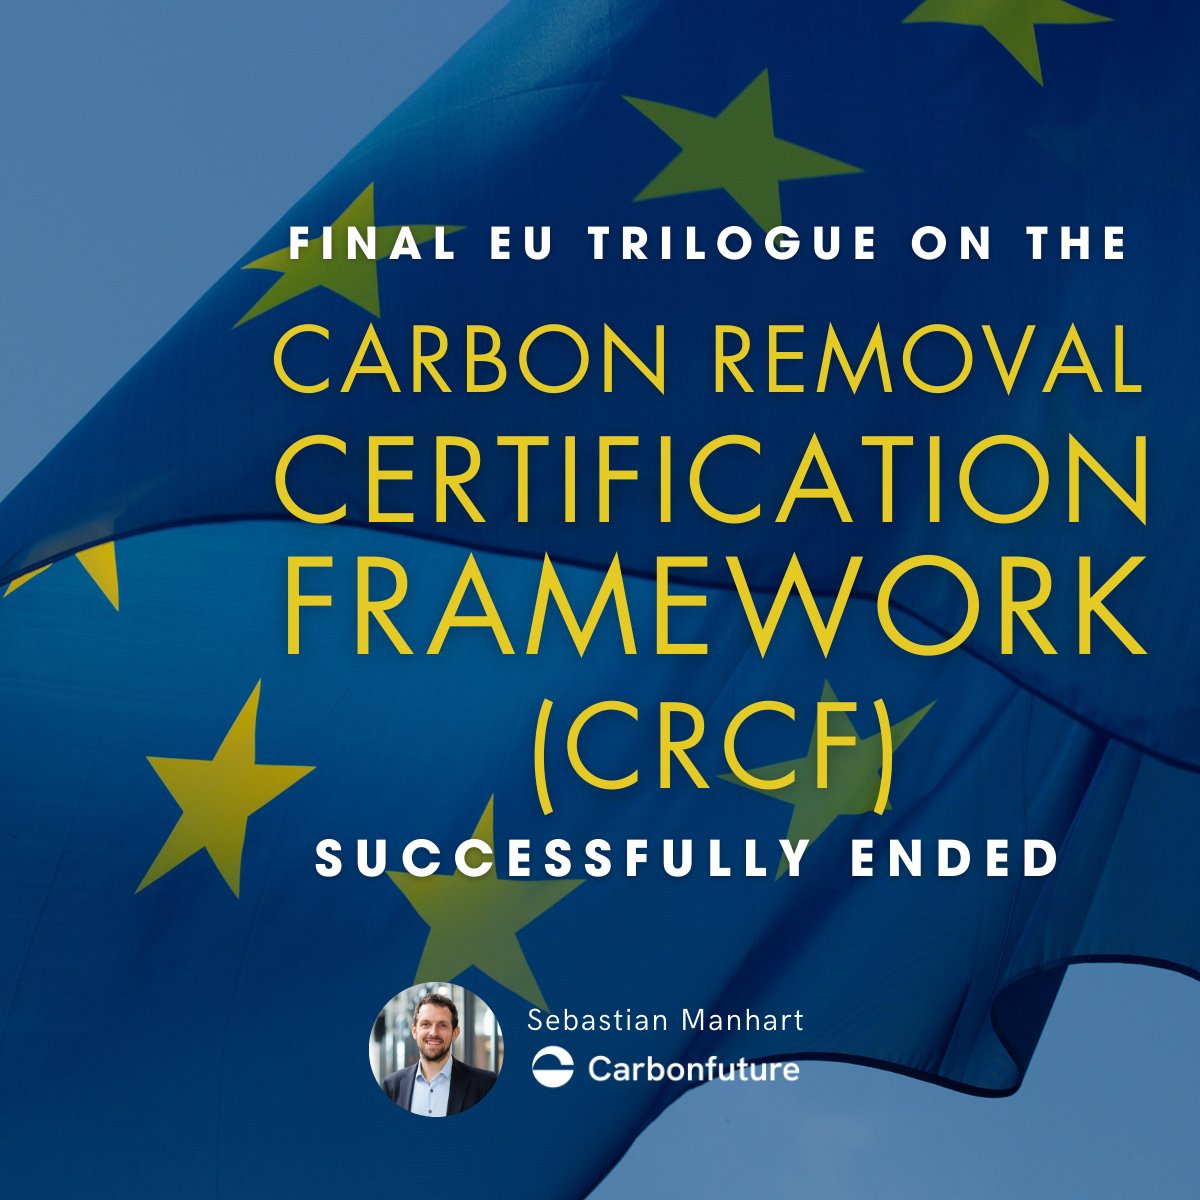 🇪🇺🚨 BREAKING: EU Agreement on Carbon Removal Certification Framework (#CRCF) 🚨🇪🇺 Early this morning, the European Institutions held the final #Trilogue meeting on the CRCF, agreeing on the final text of what could become the world’s gold standard for carbon dioxide removal…